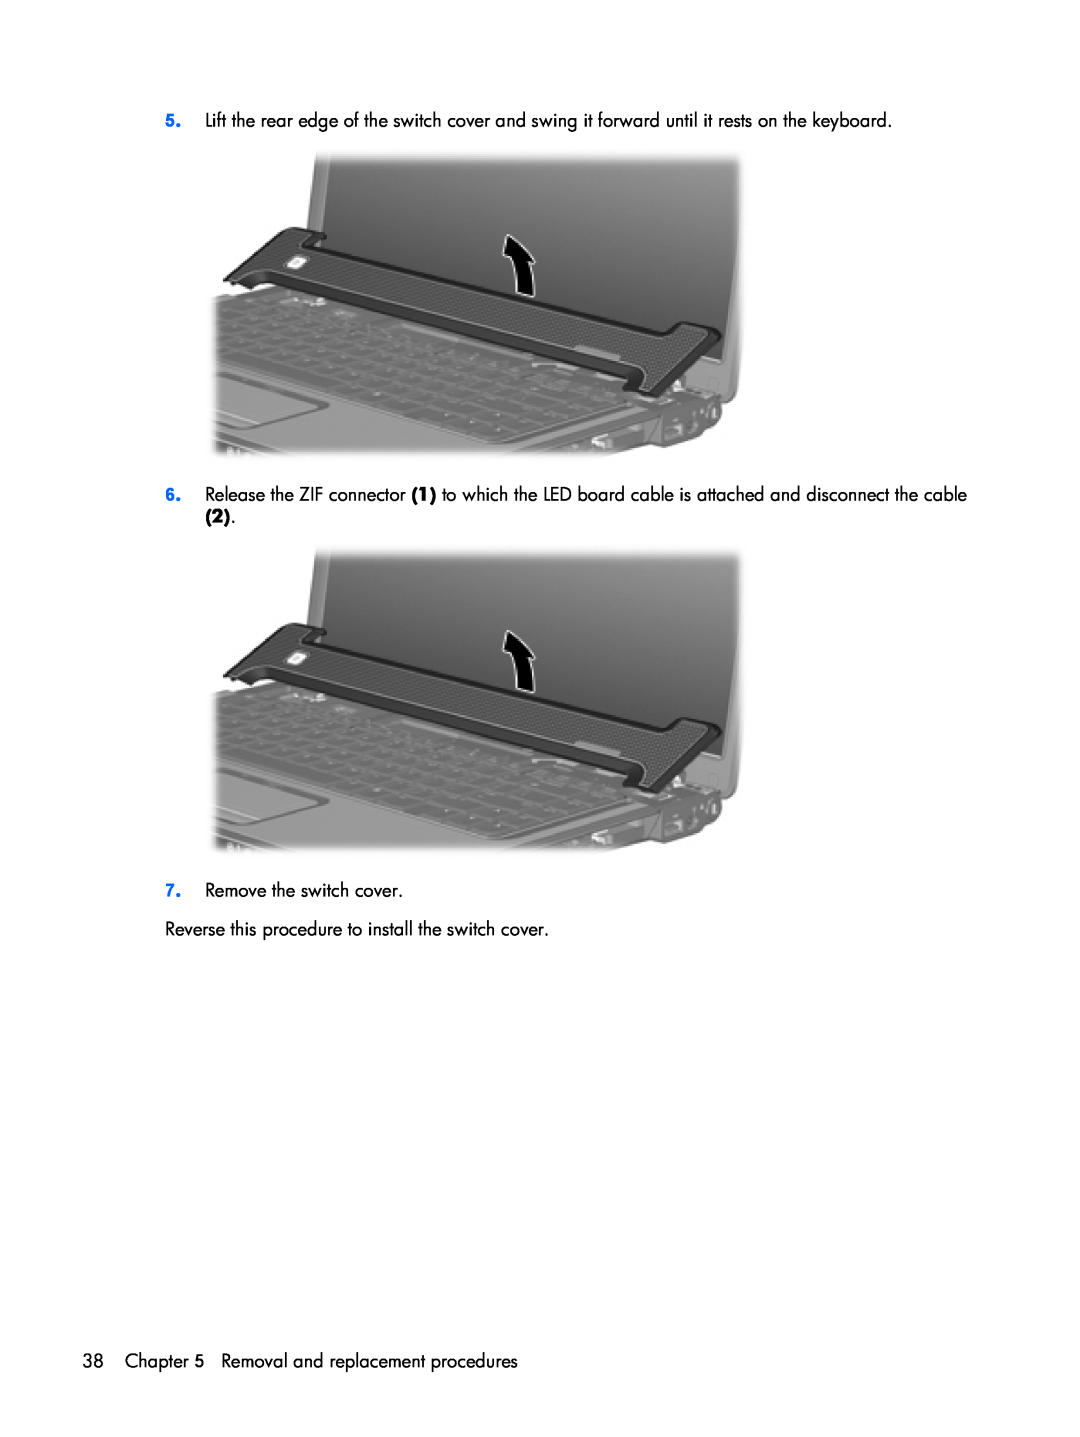 Compaq F500 manual Remove the switch cover, Reverse this procedure to install the switch cover 